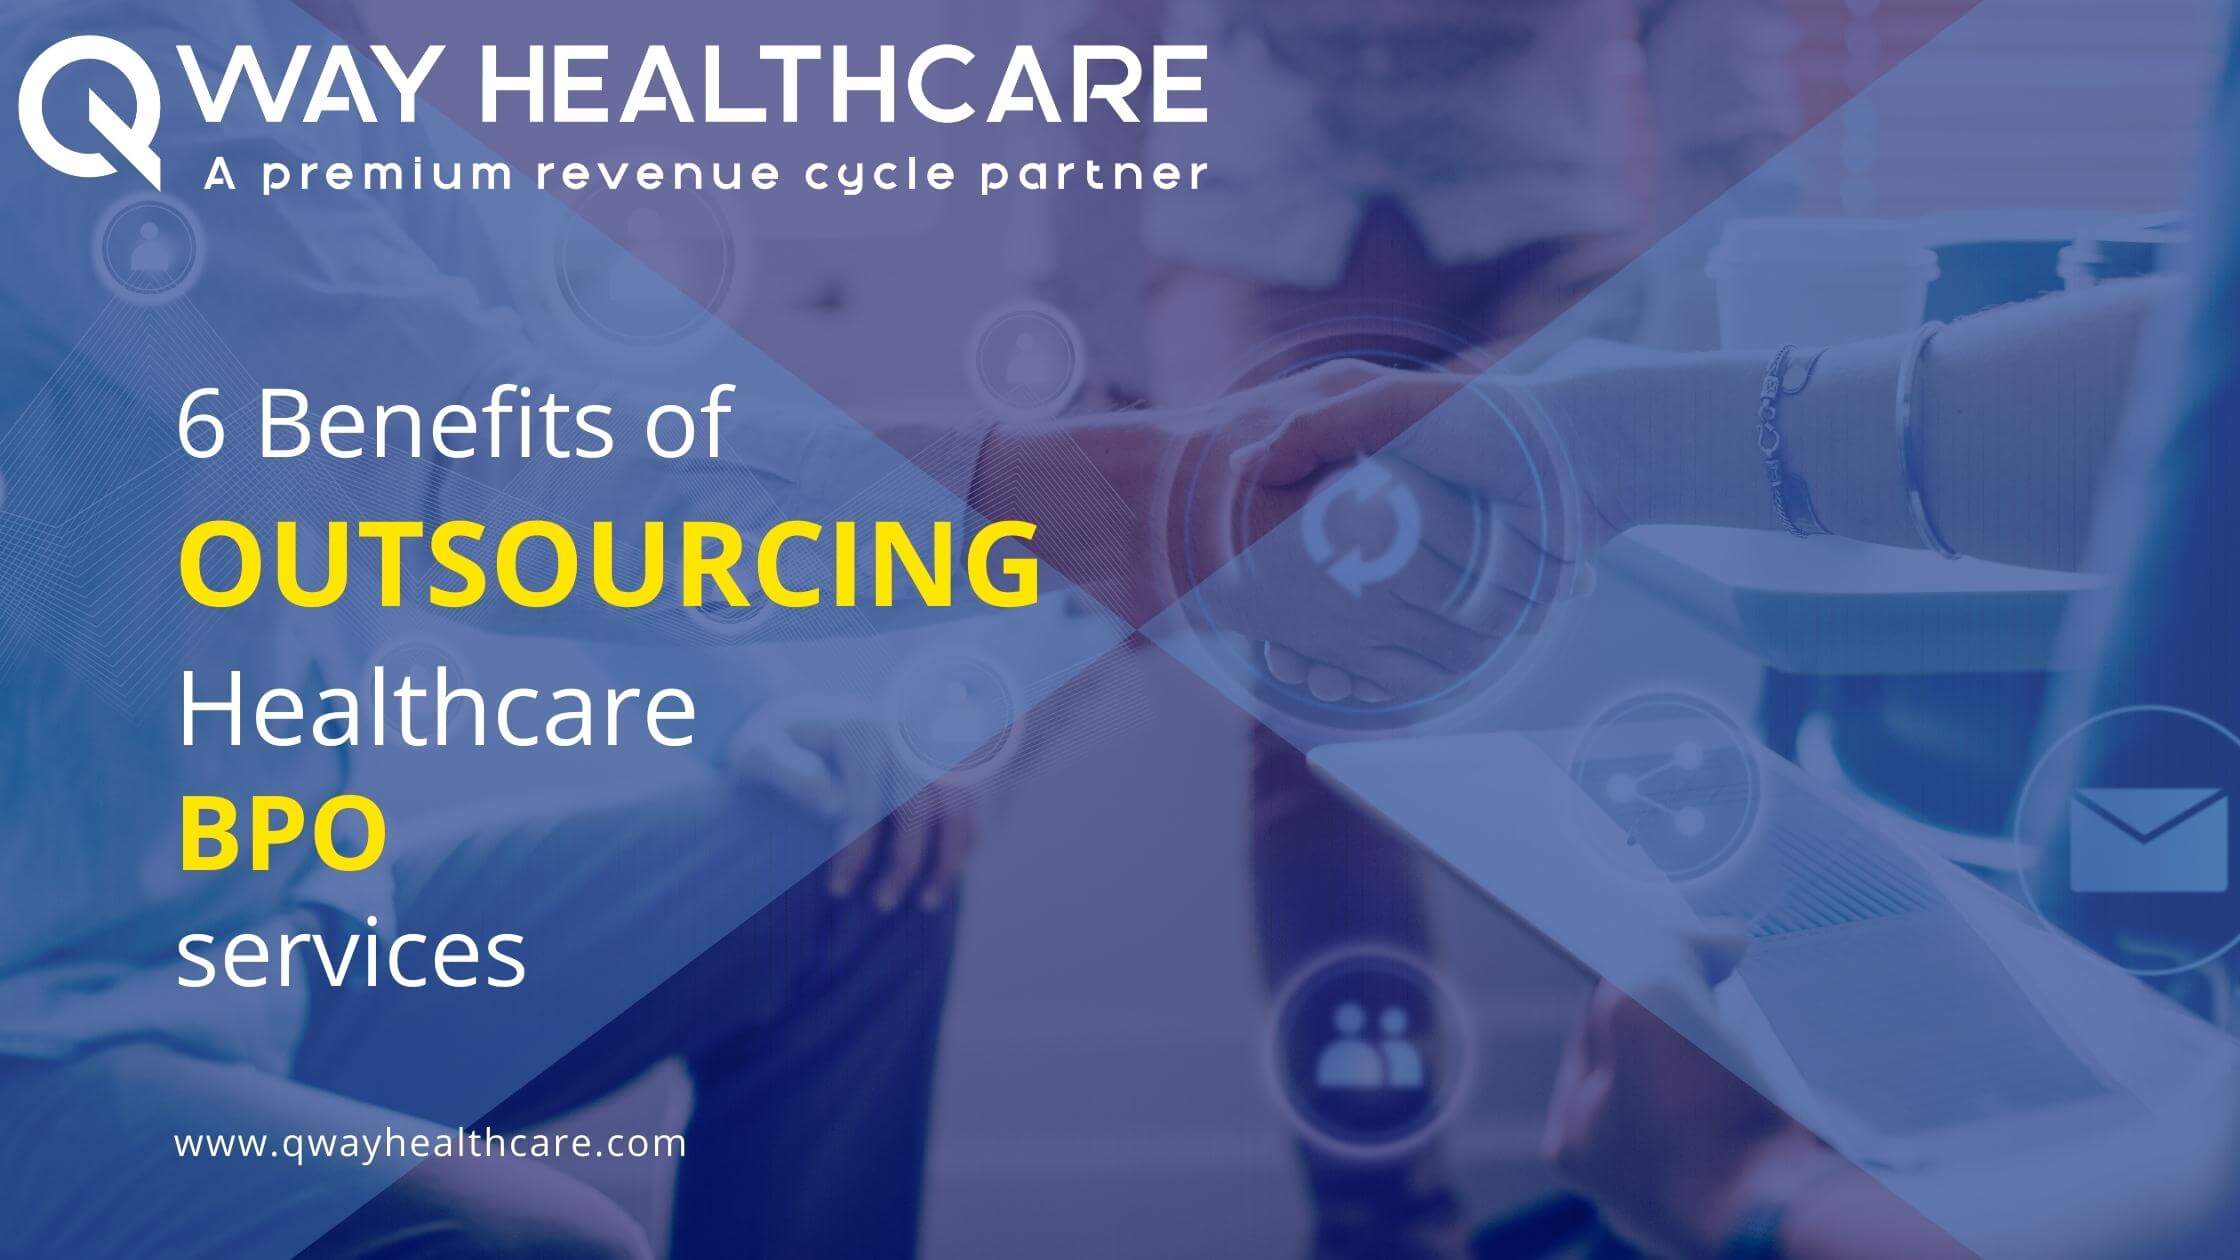 6 Benefits of Outsourcing Healthcare BPO Services